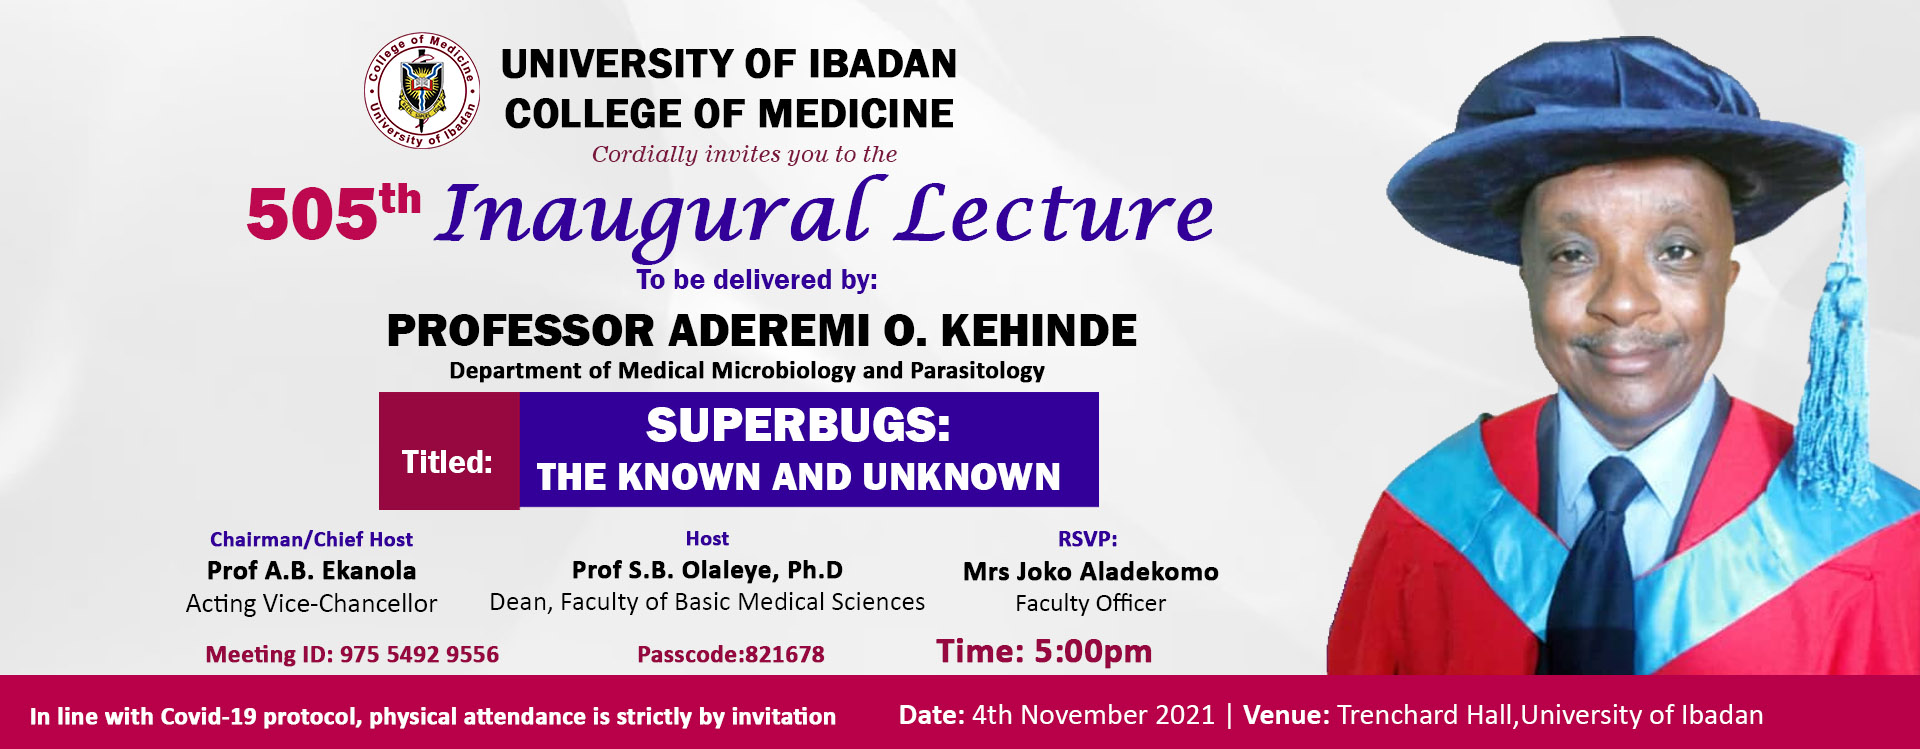 505TH INAUGURAL LECTURE TO BE DELIVERED BY PROFESSOR A. O. KEHINDE